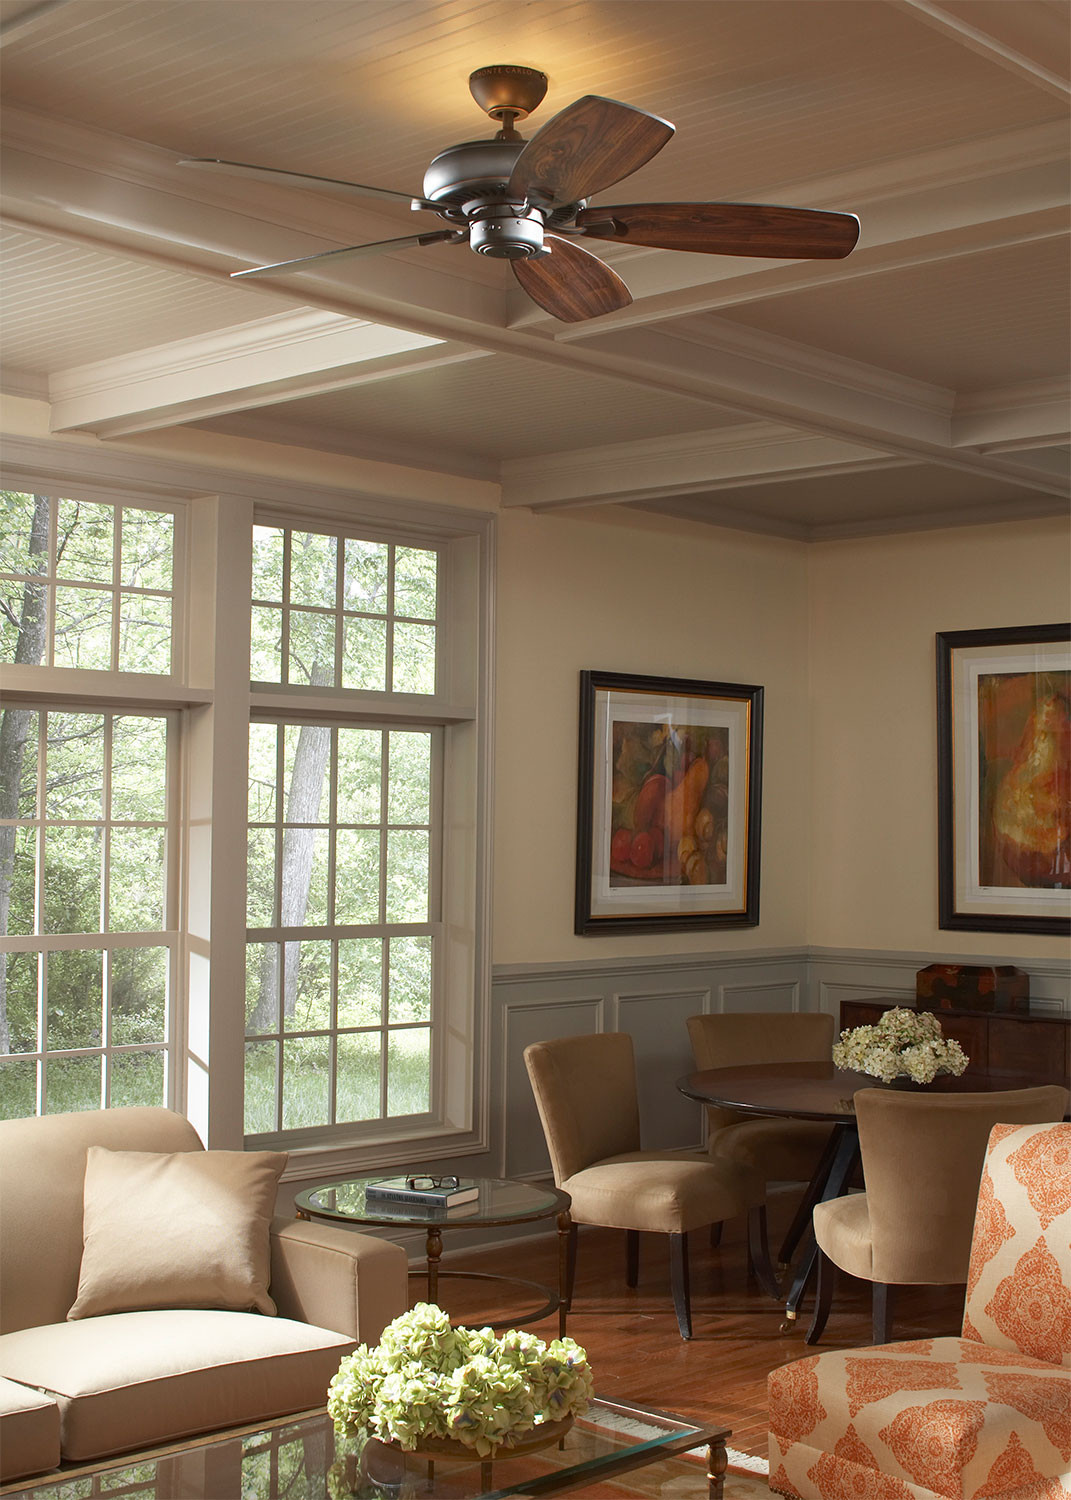 Modern Living Room Ceiling Fan
 Contemporary Ceiling Fans and the Lifestyle of Urban